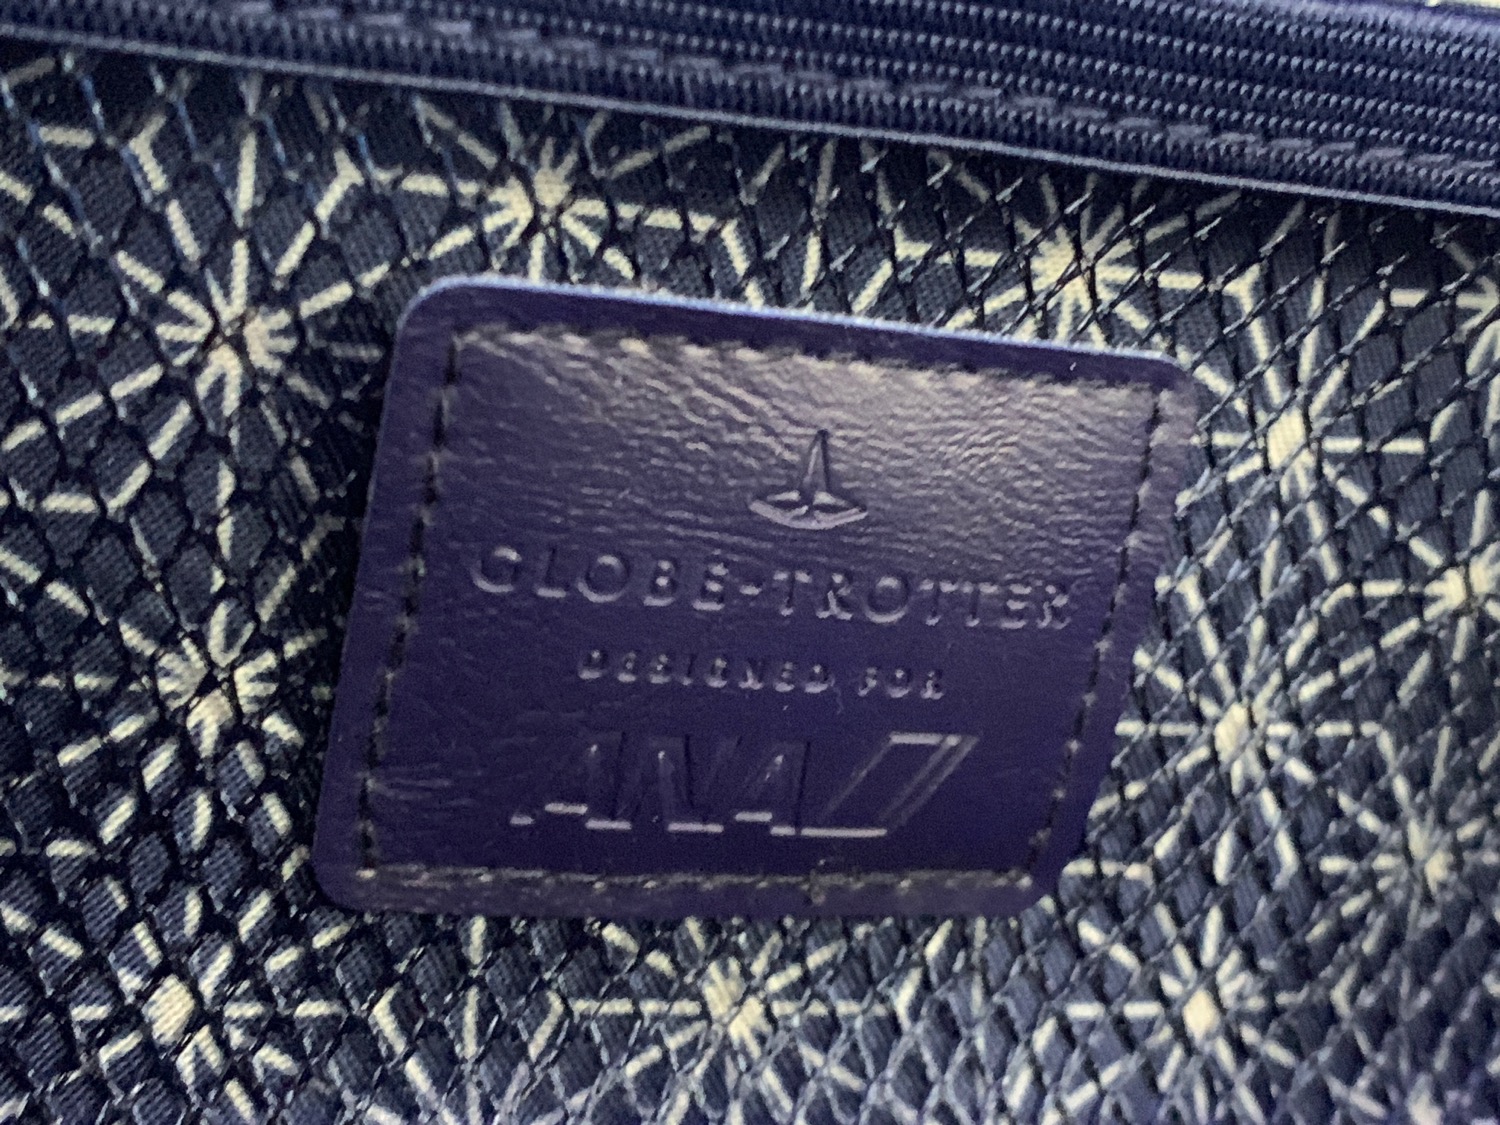 a close up of a leather label